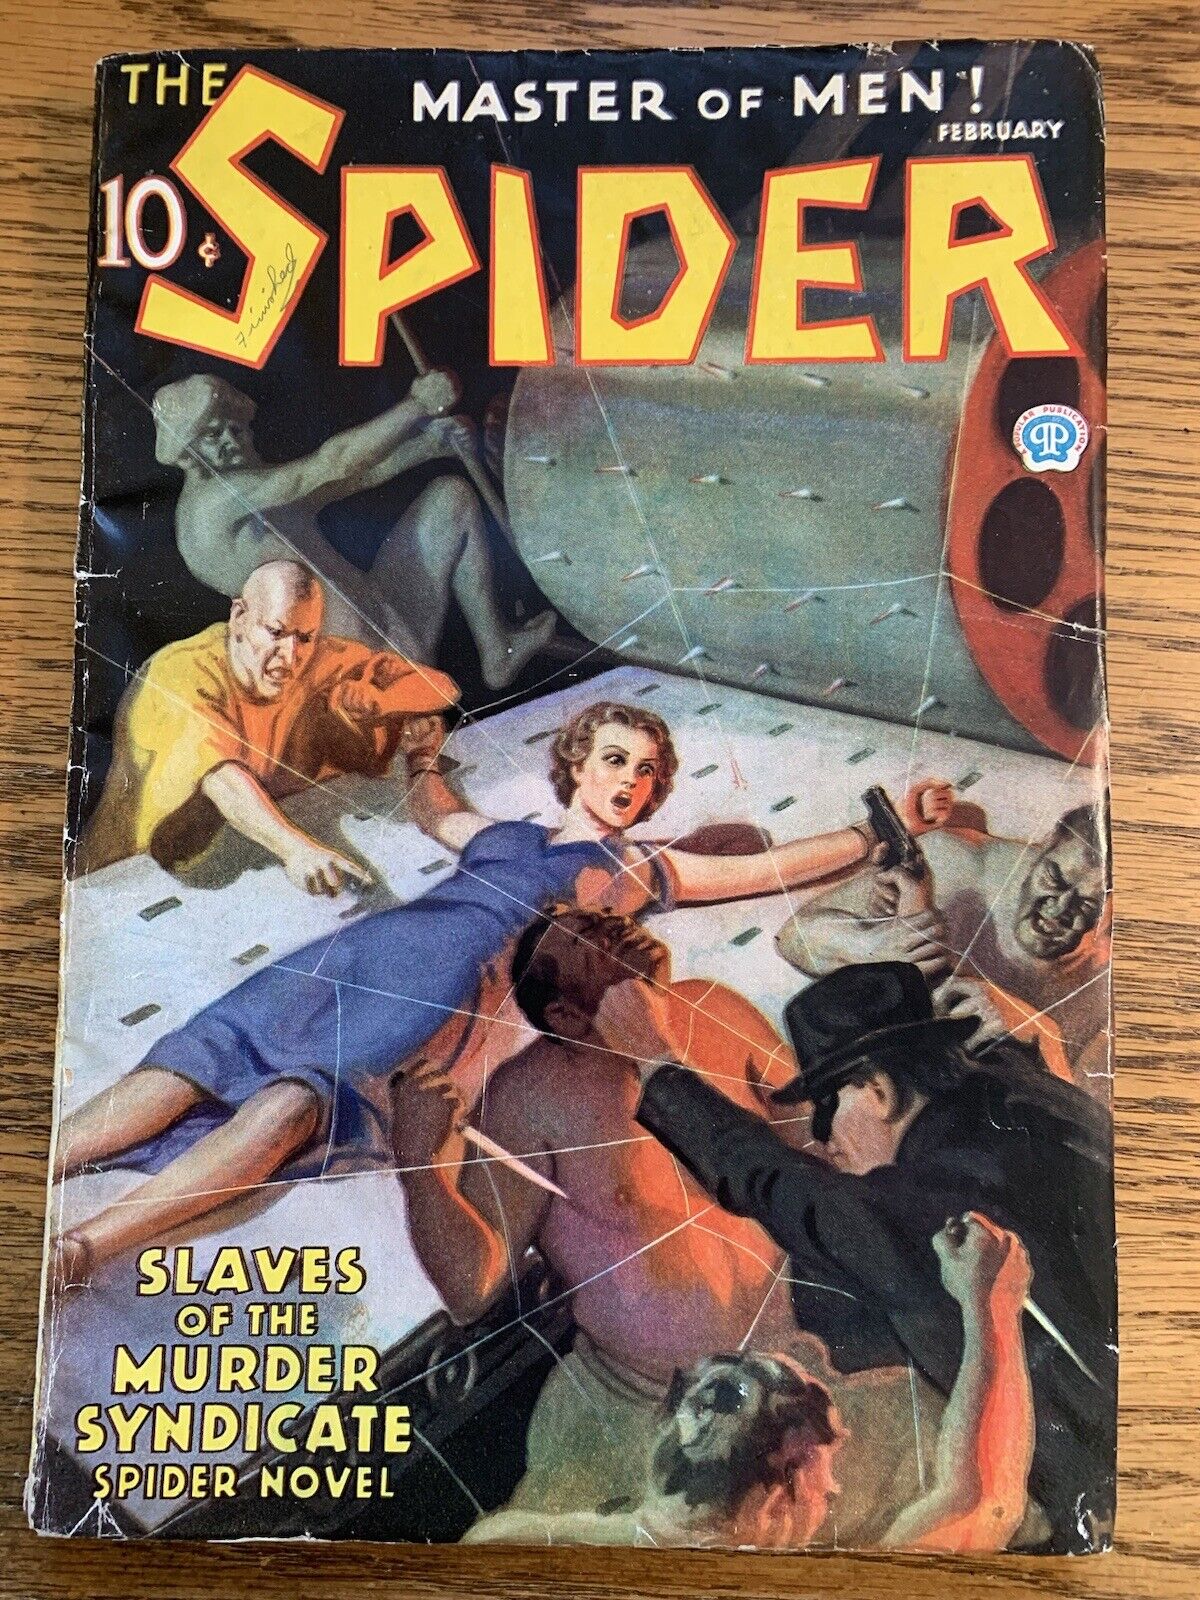 Pulp Magazine The Spider Master of Men February 1936 Vintage Pulp Classic Cover